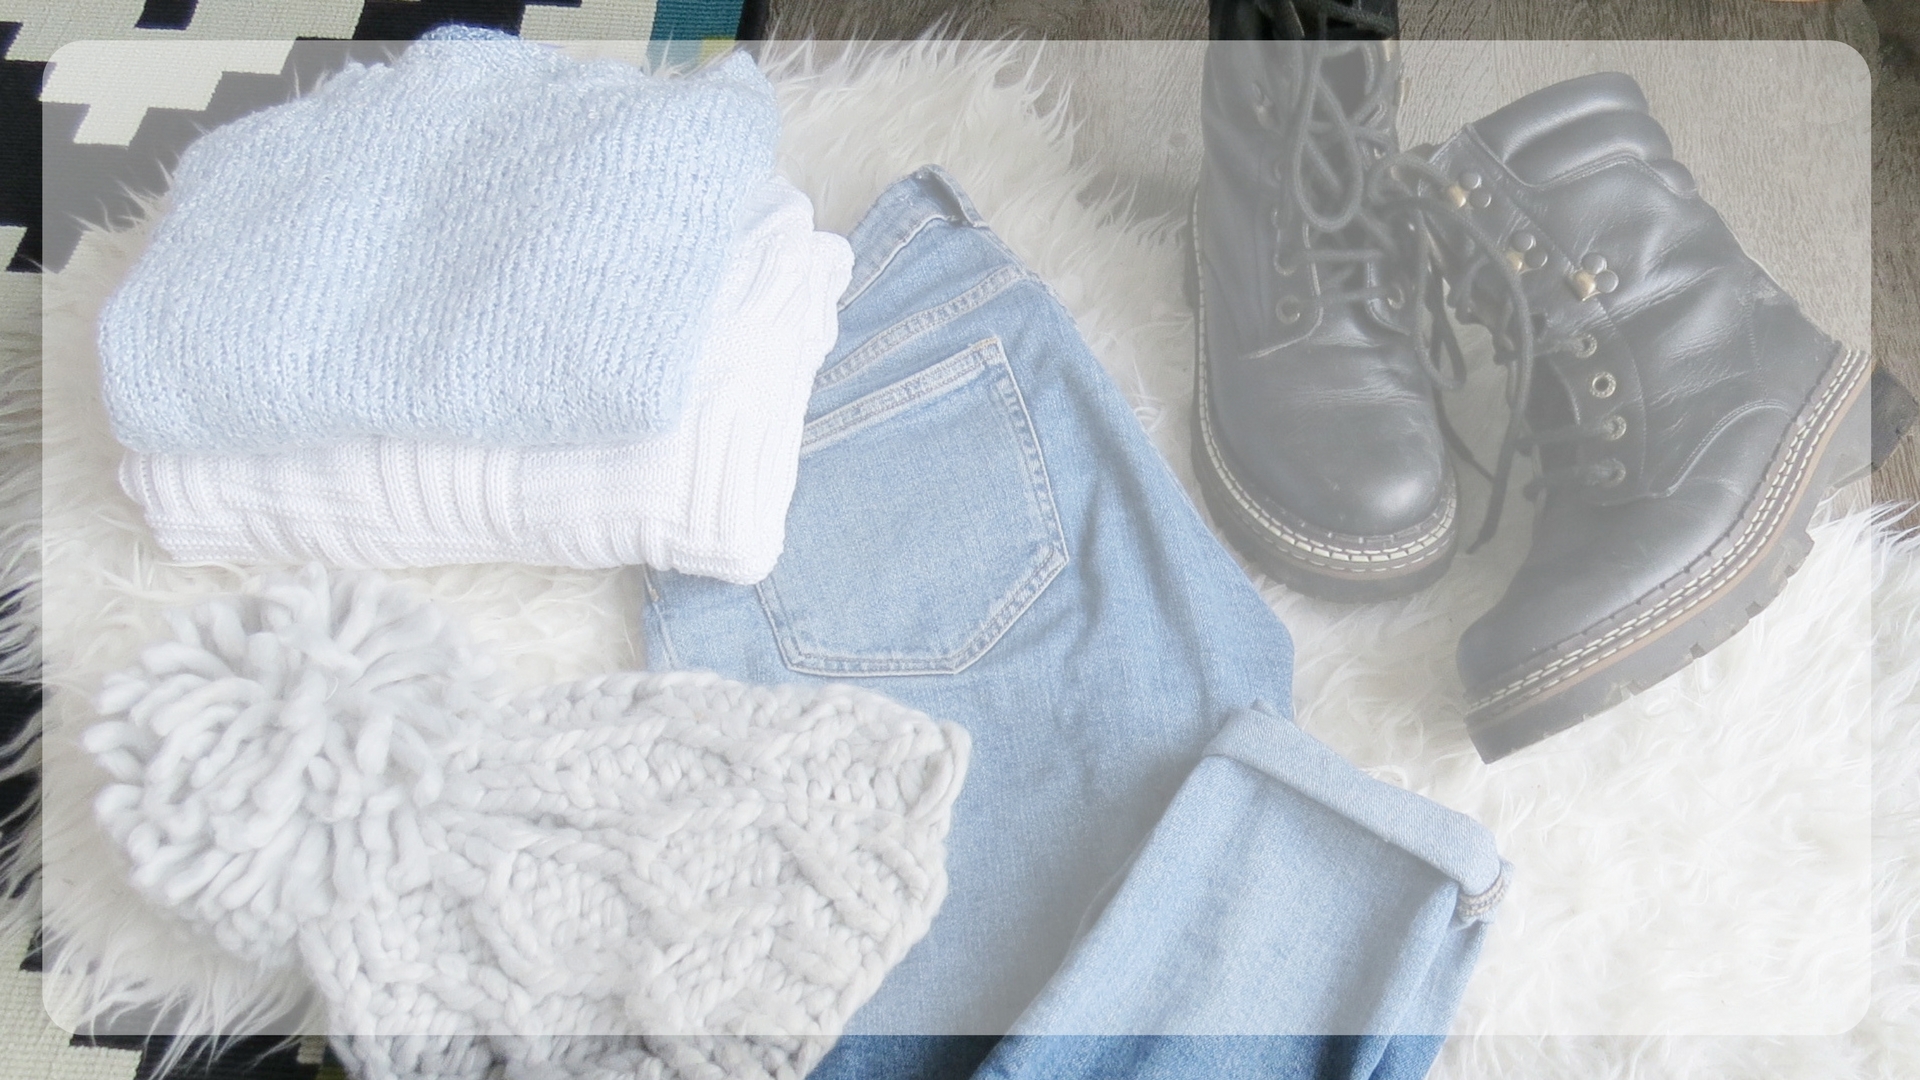 hipster winter outfits tumblr